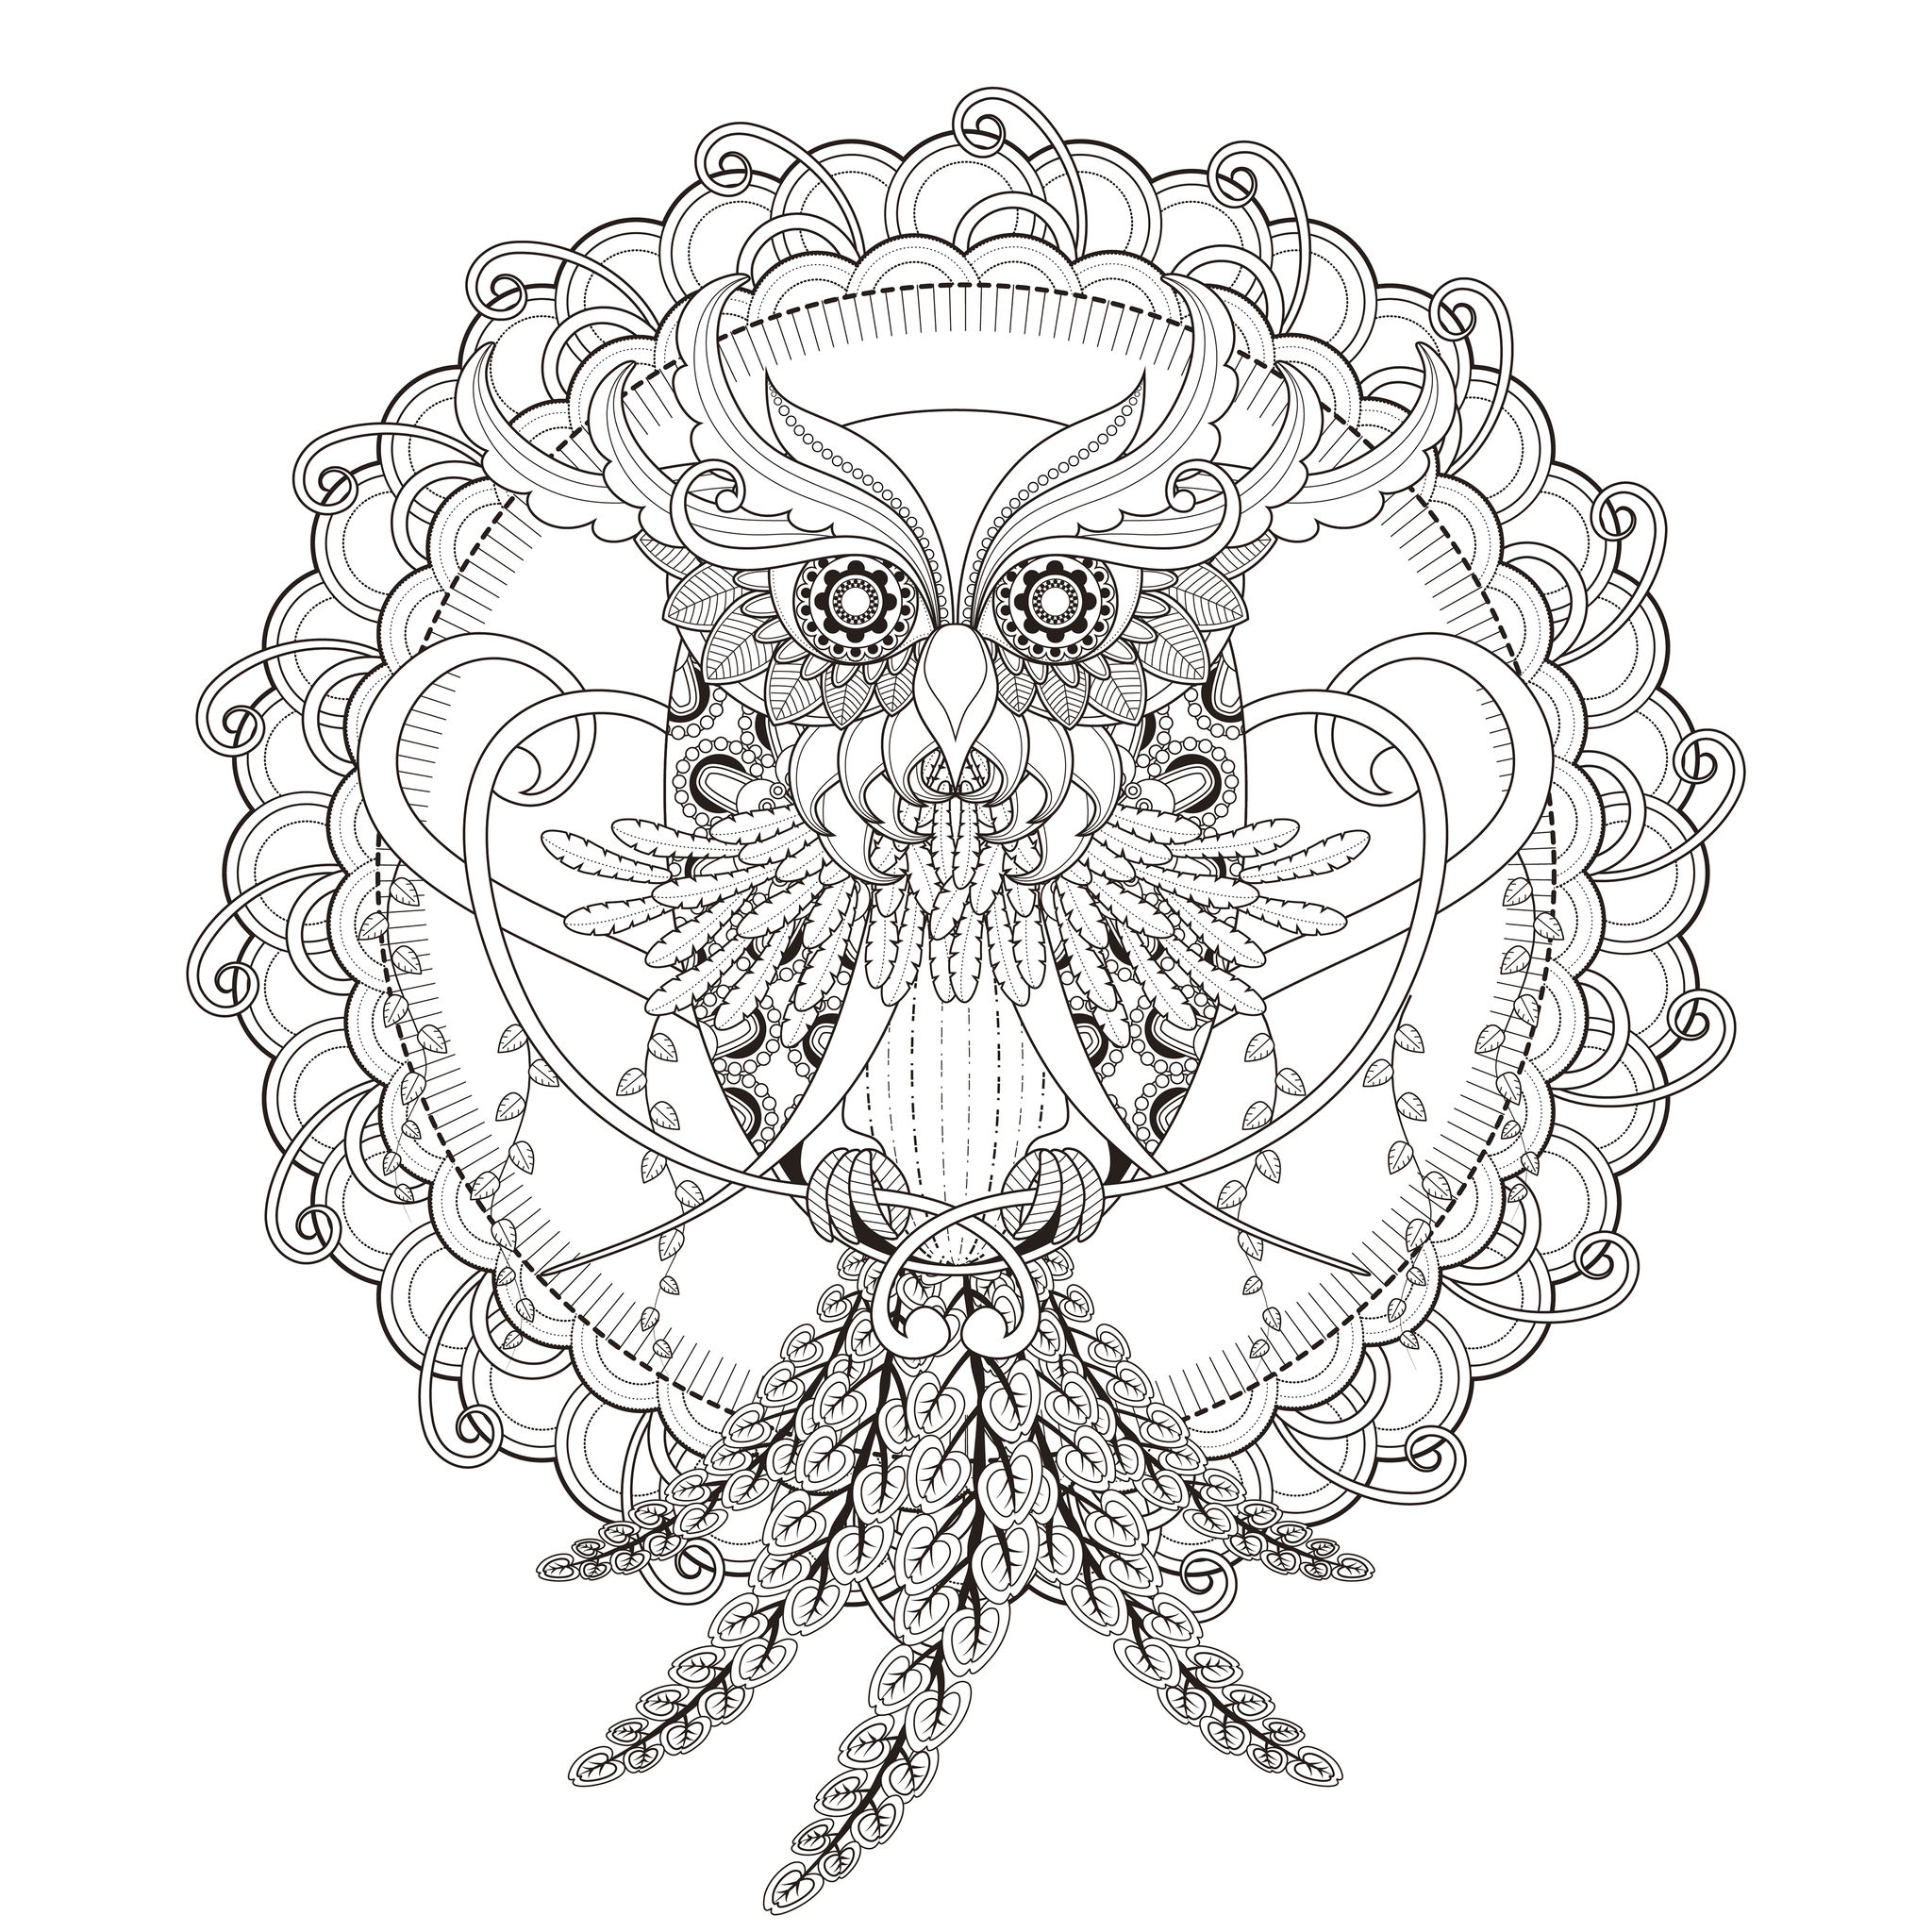 owl-mandala-coloring-pages-coloring-pages